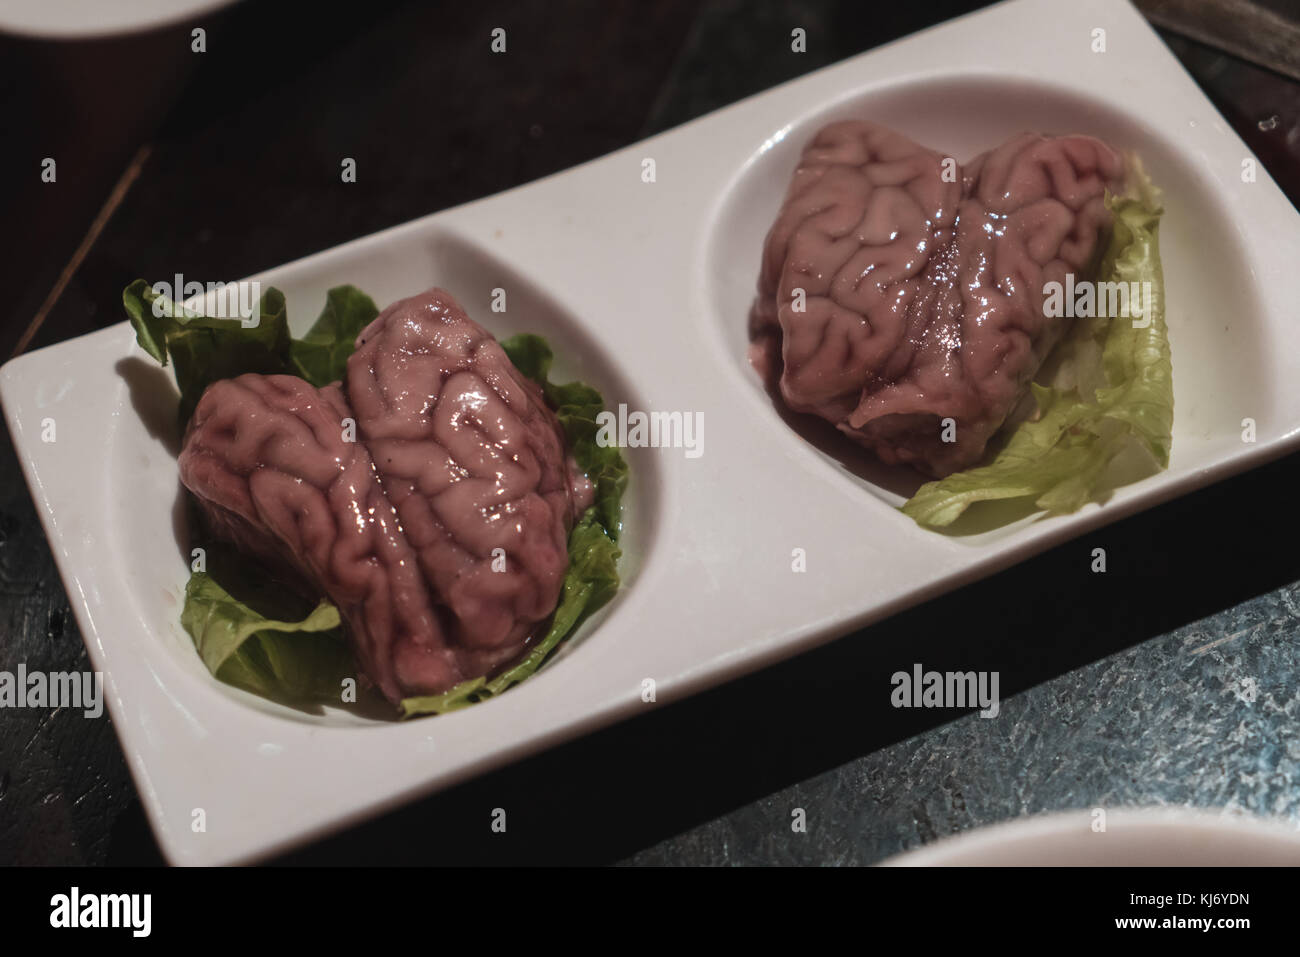 Exotic chinese food like pig brains to be eaten within popular chinese soup Hot Pot in Chengdu, Sichuan Province, China Stock Photo